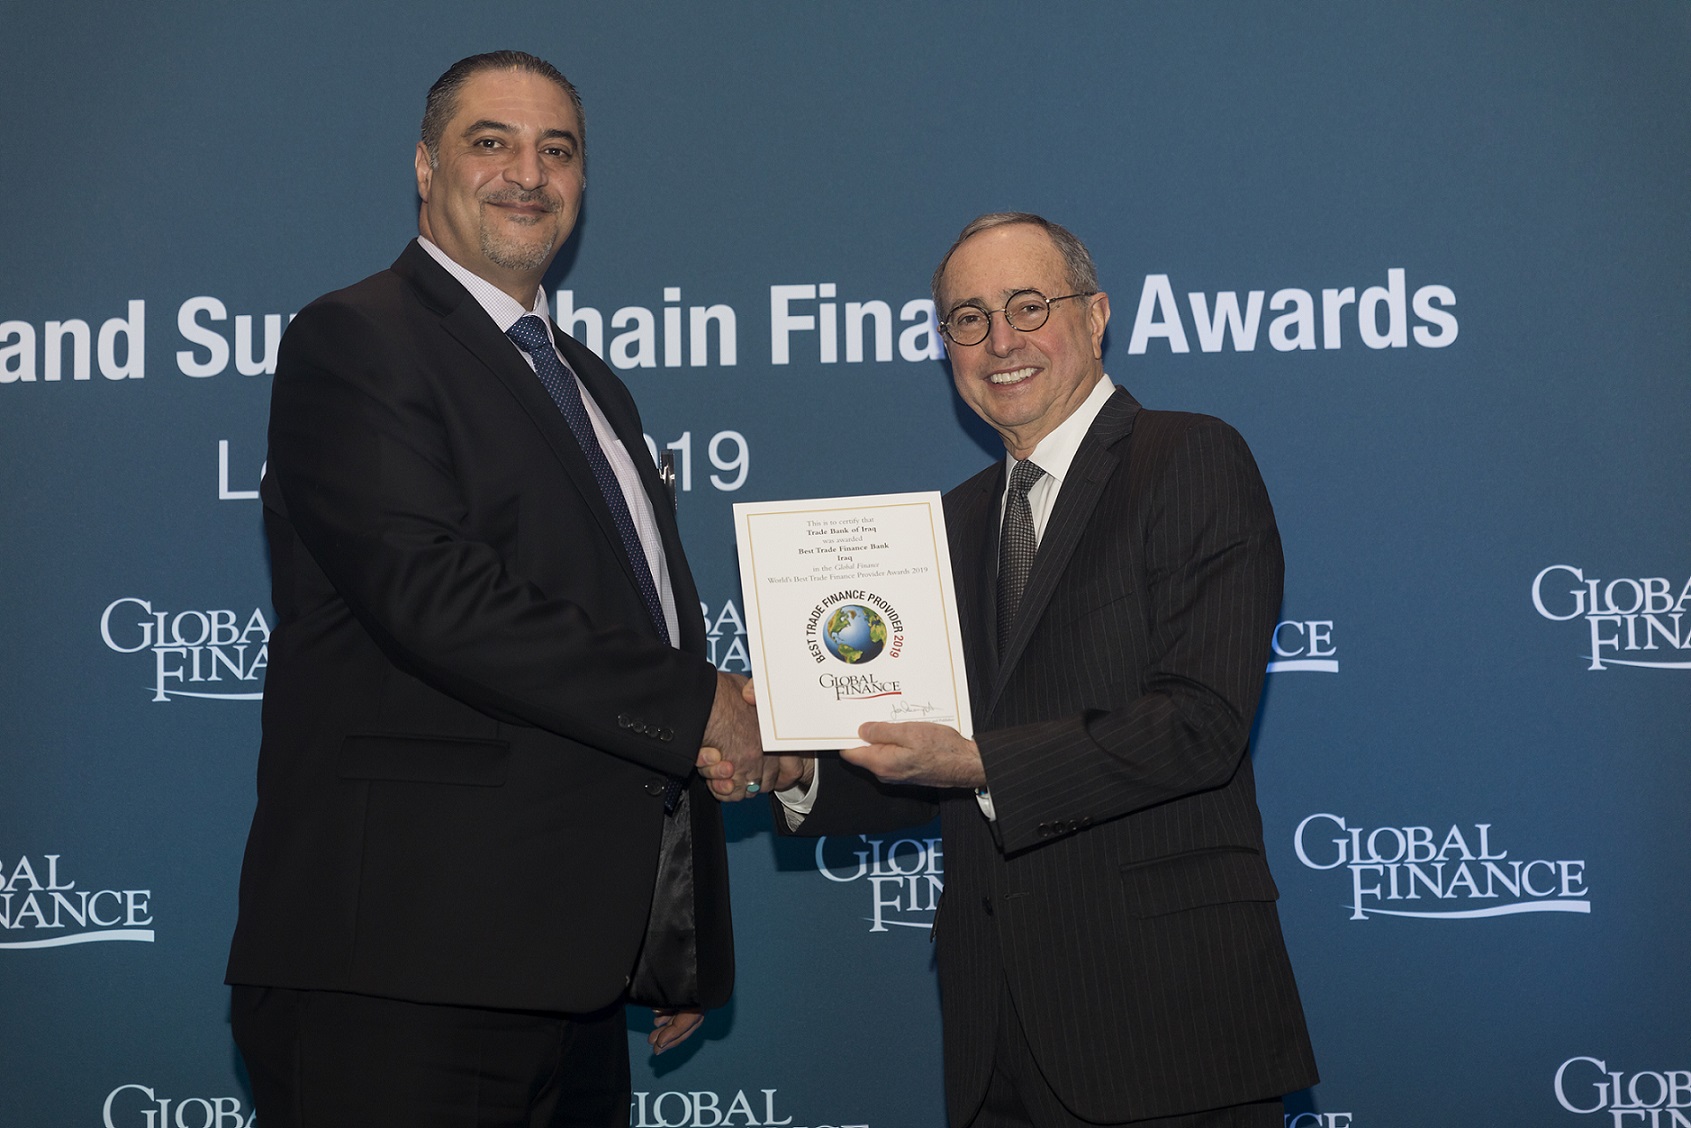 The Iraqi Trade Bank is awarded the best commercial bank in Iraq for 2019 Best-Trade-Finance-Bank-in-Iraq-by-GlobalFinance2019_00